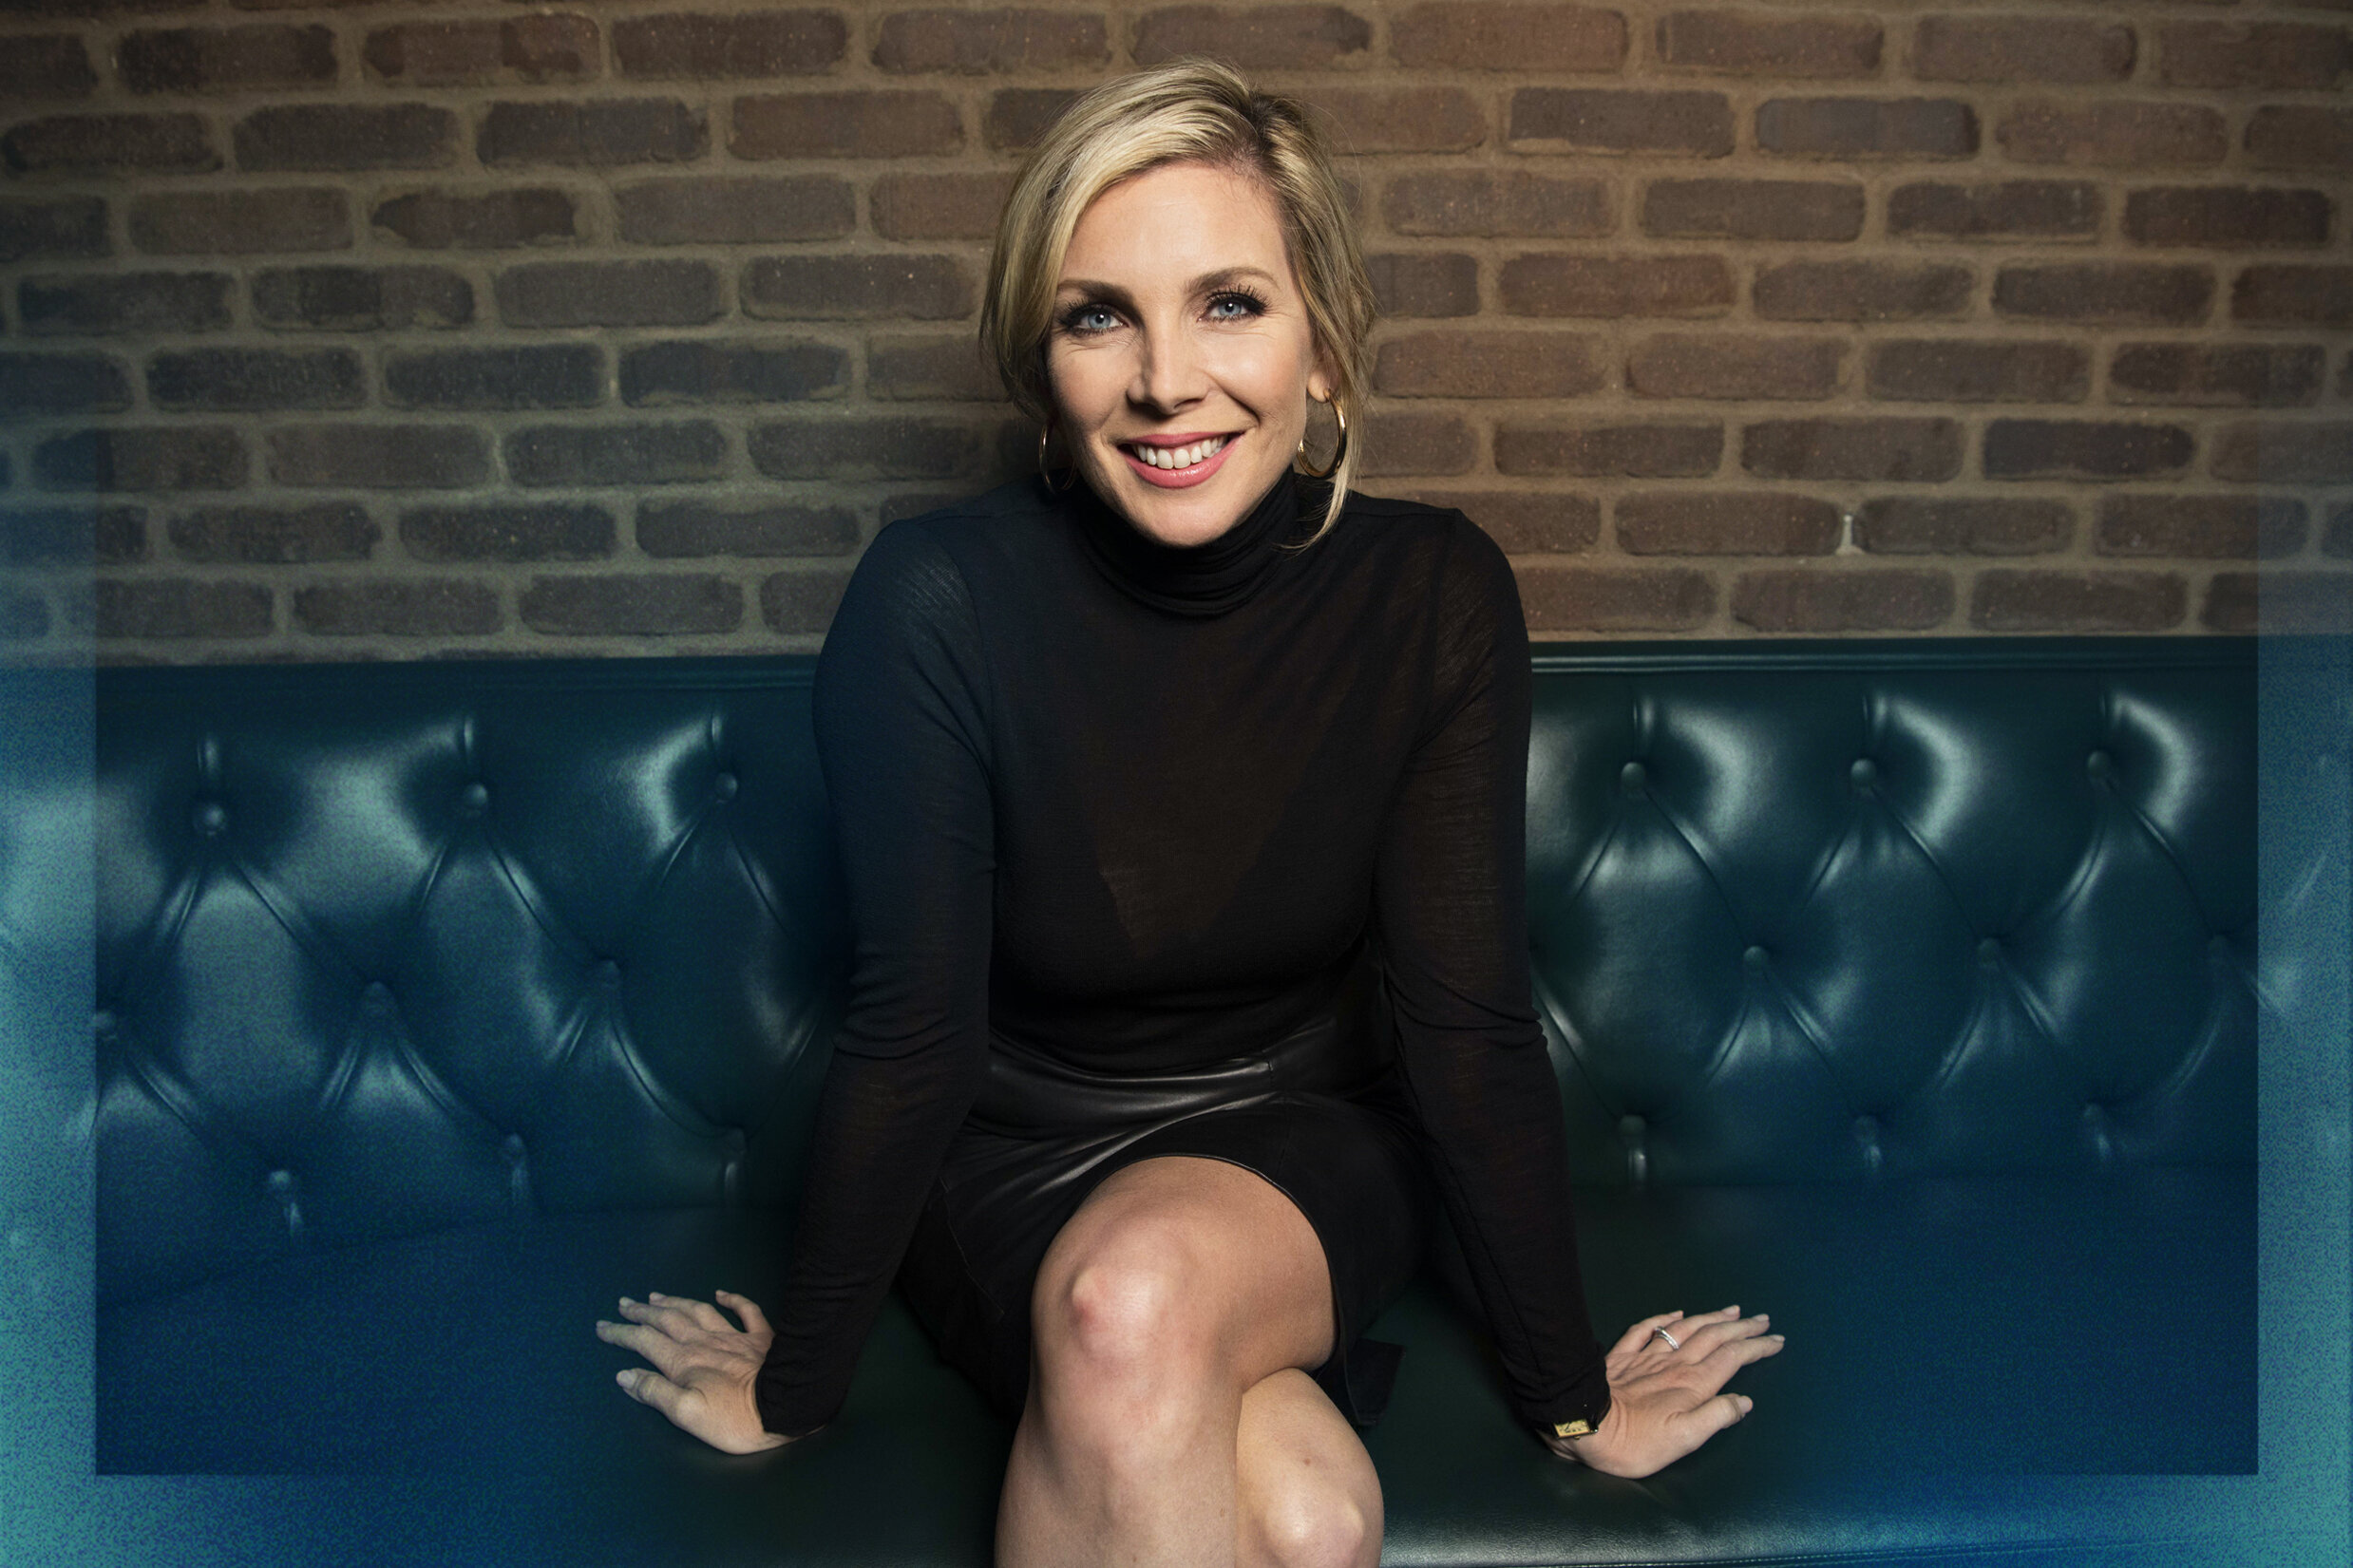 buddy trotter recommends june diane raphael feet pic